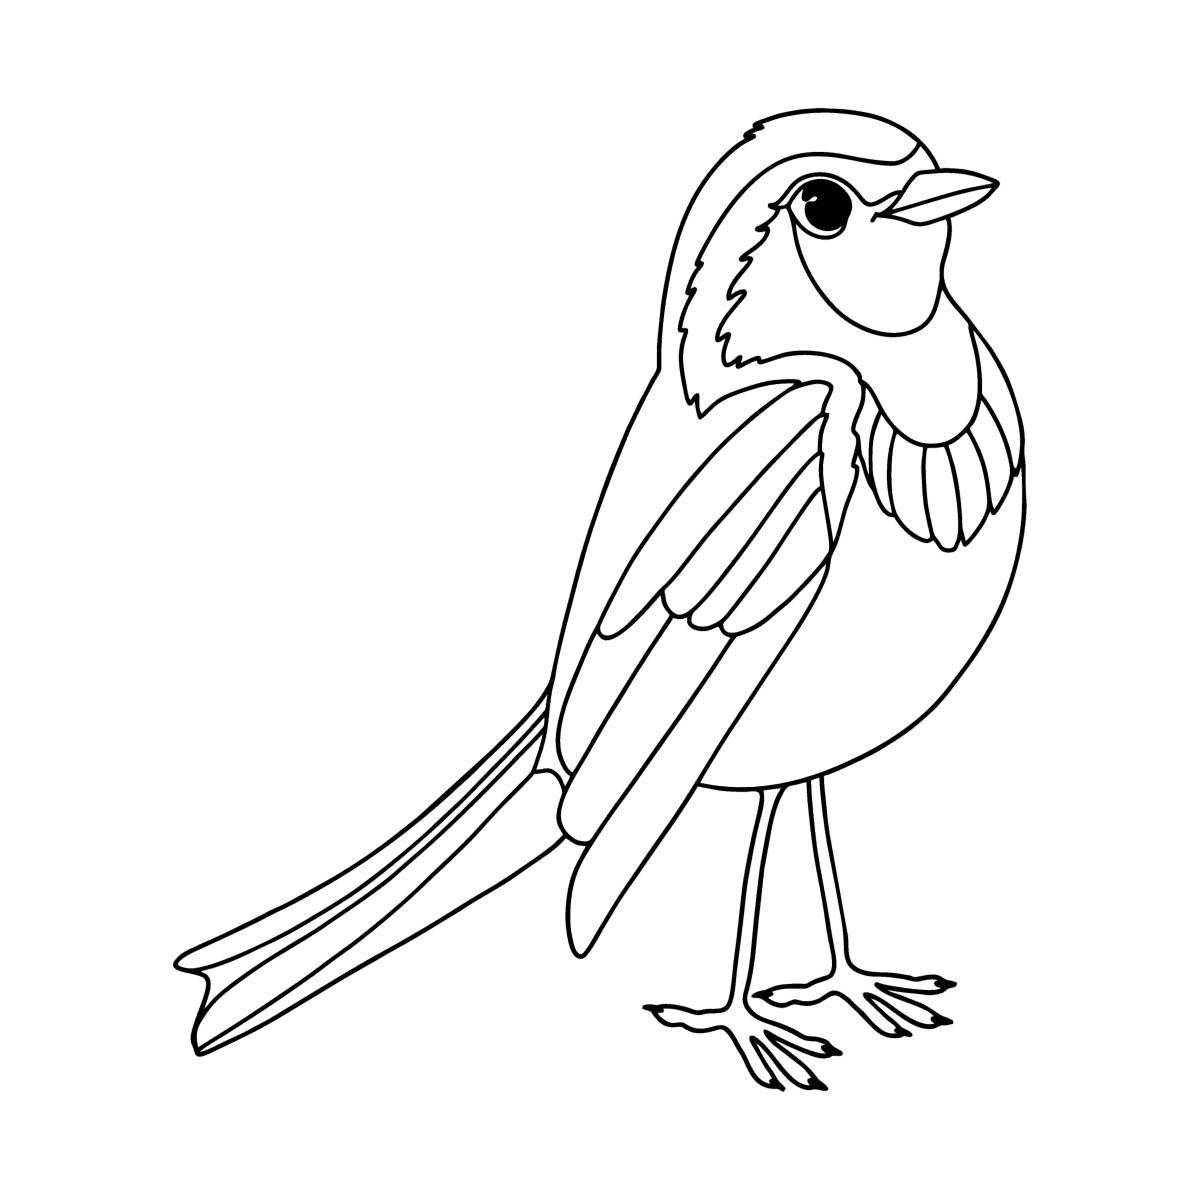 Colorful bird coloring page for 5-6 year olds